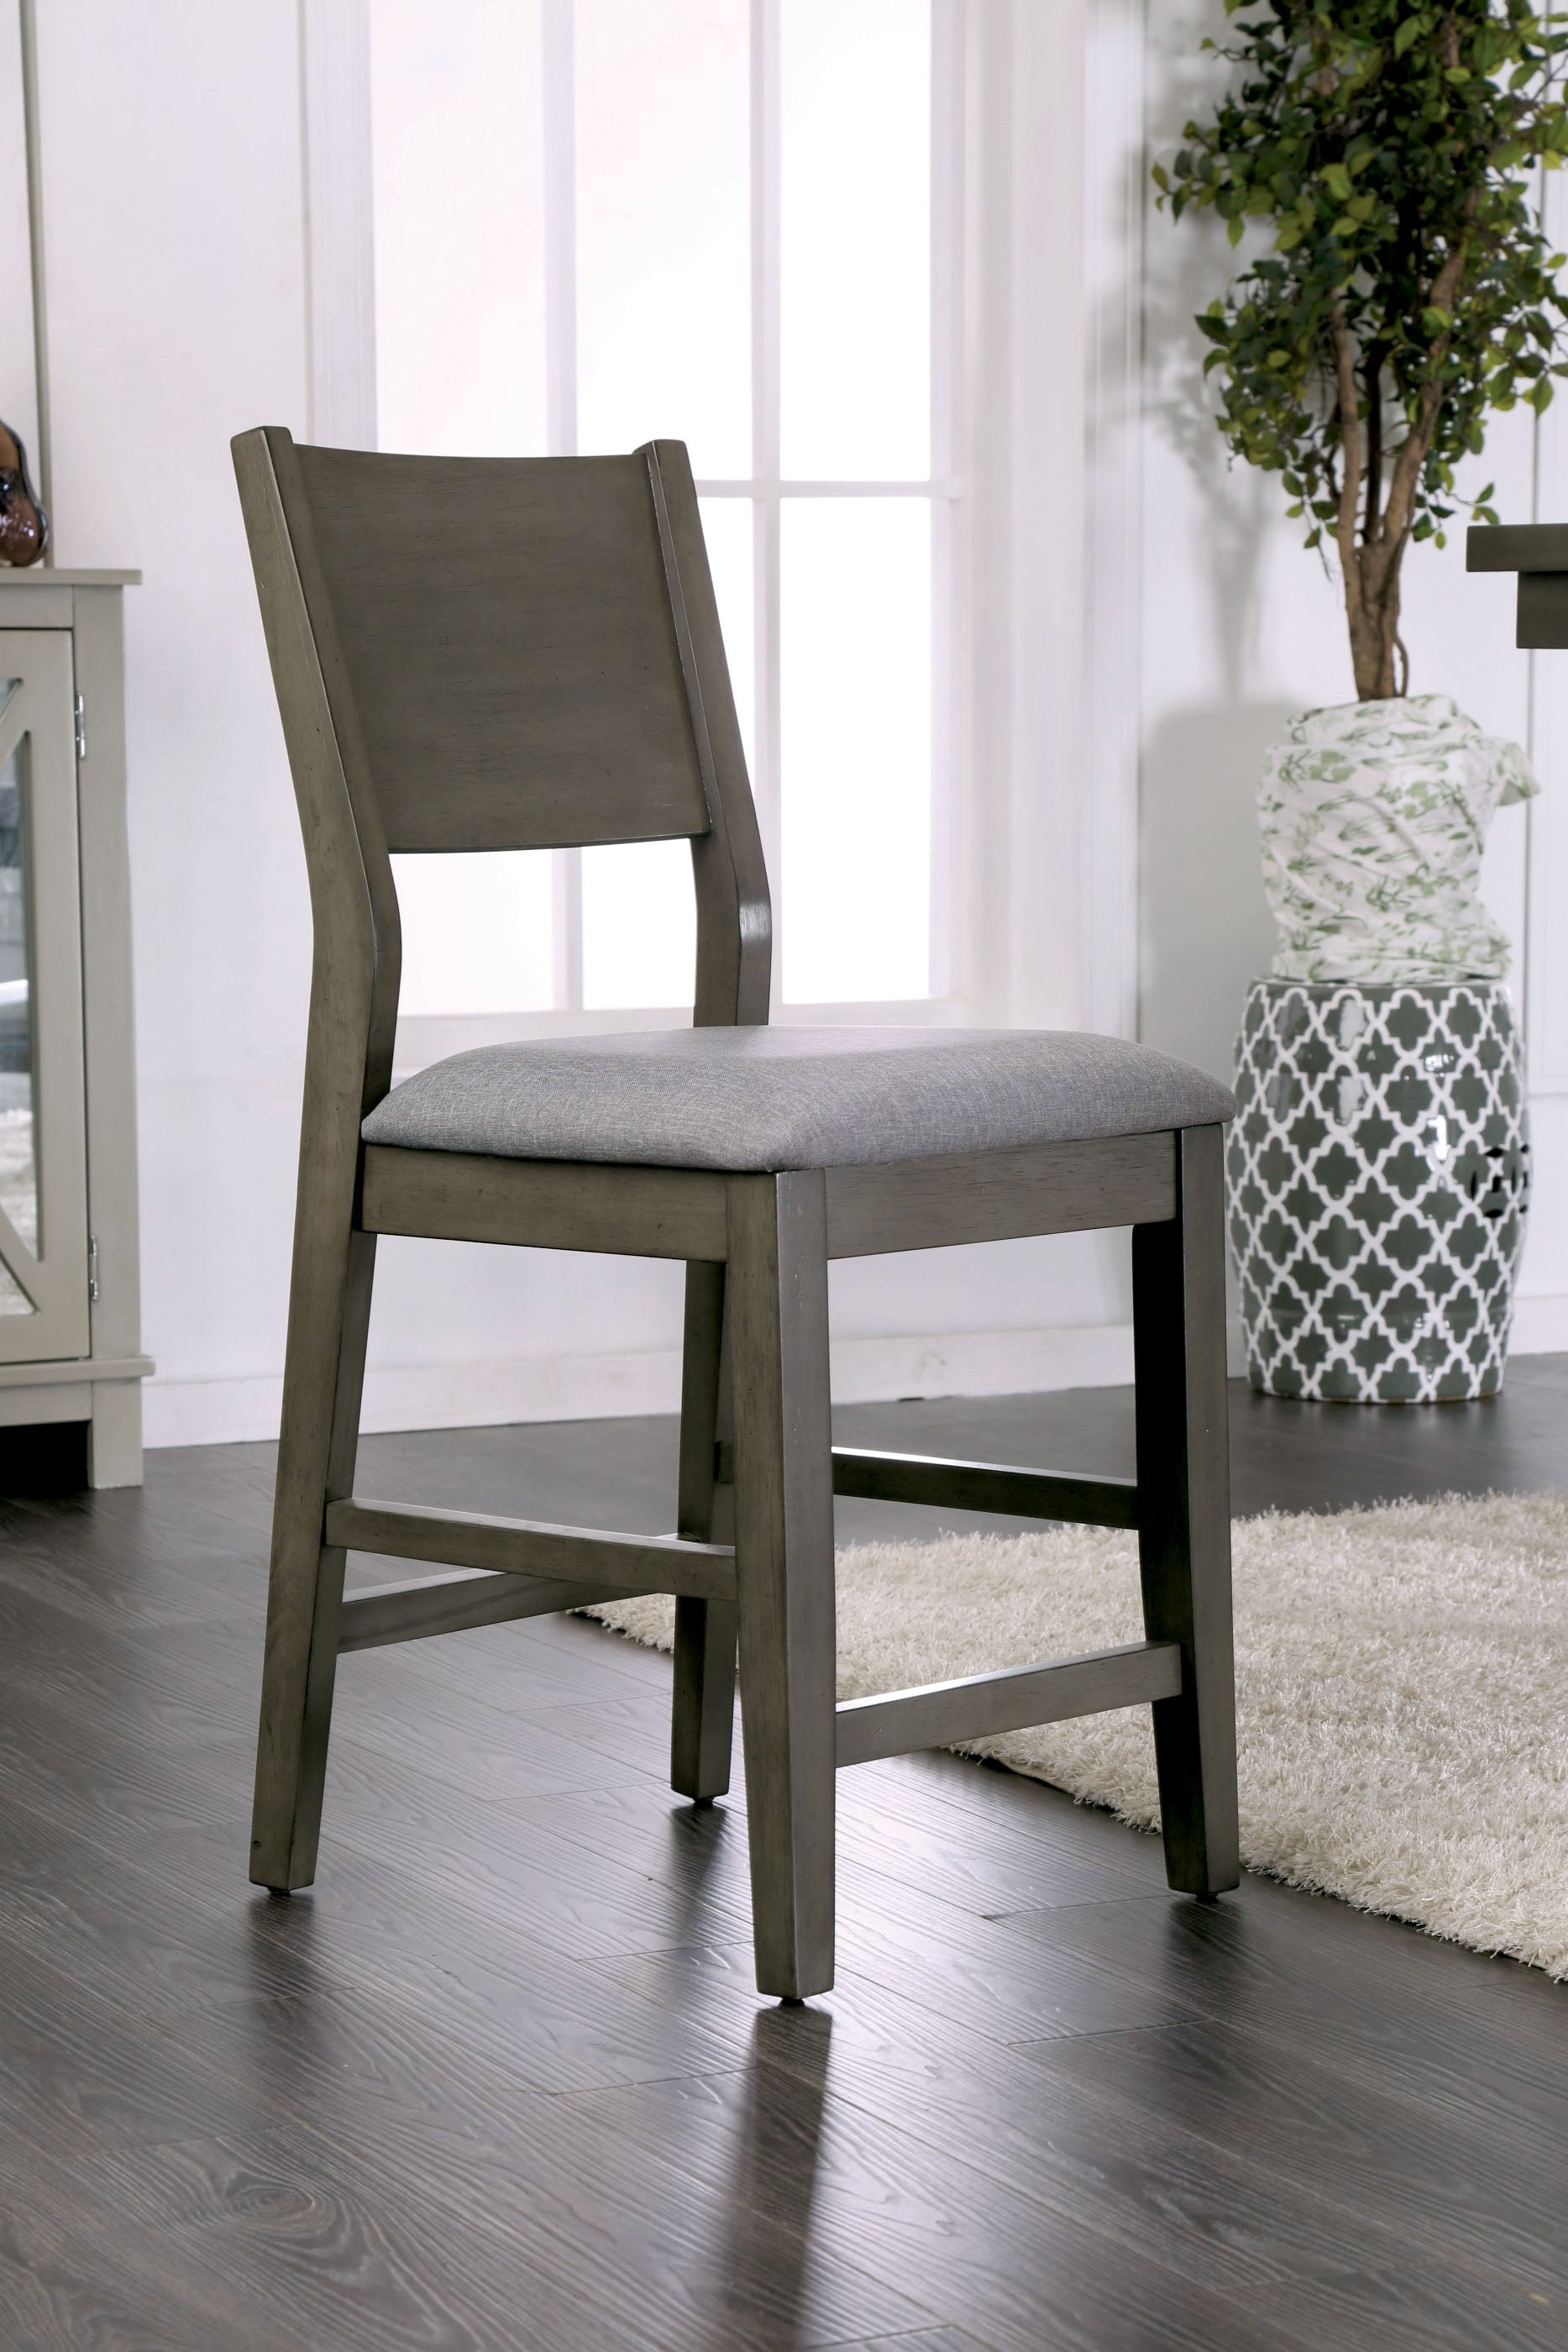 Contemporary Pub Chair in Gray, Set of 2